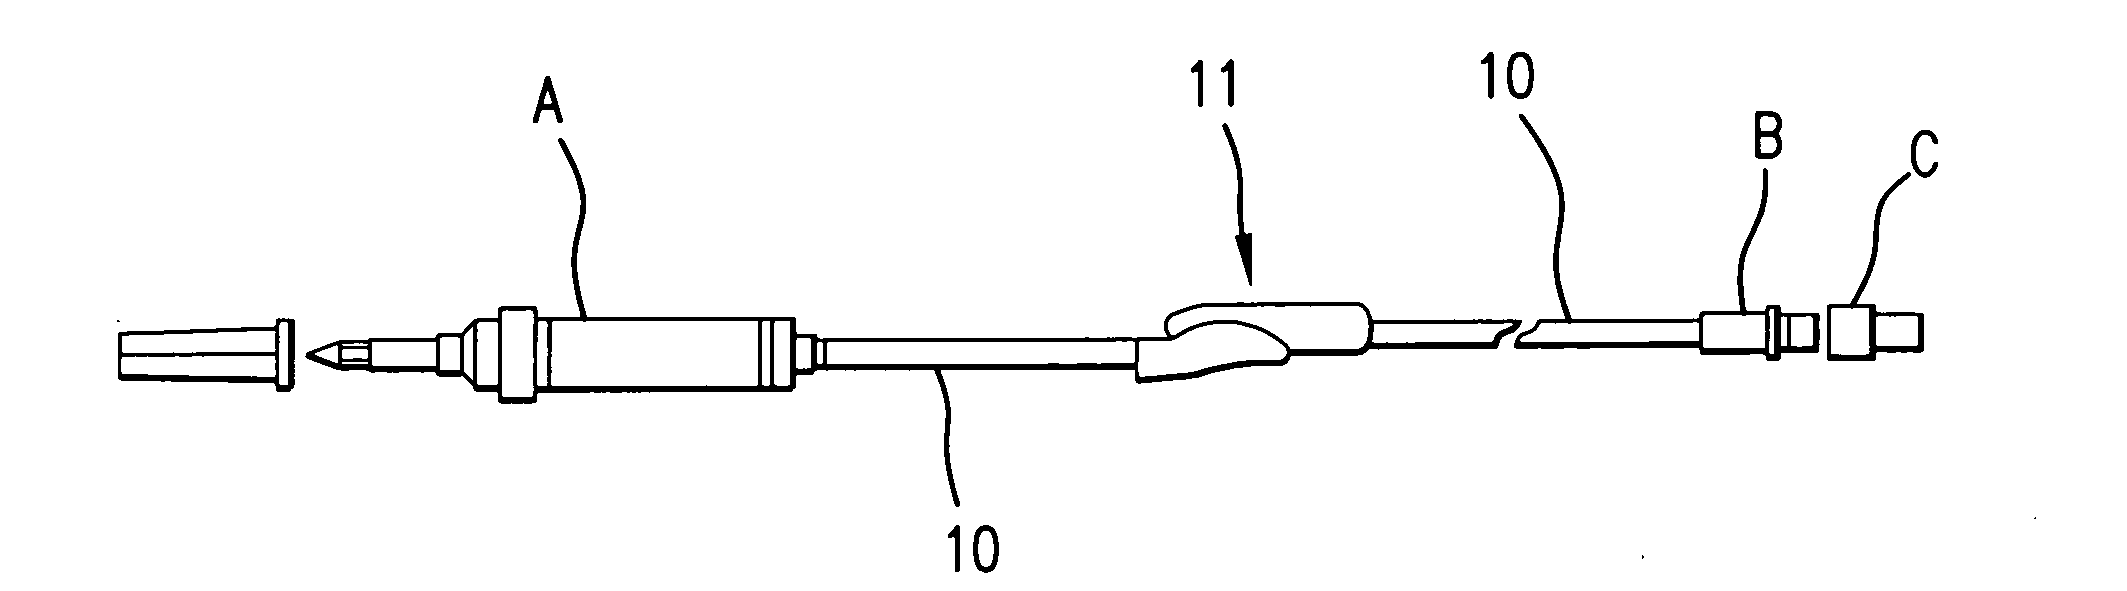 Medical in-line flow control clamp device